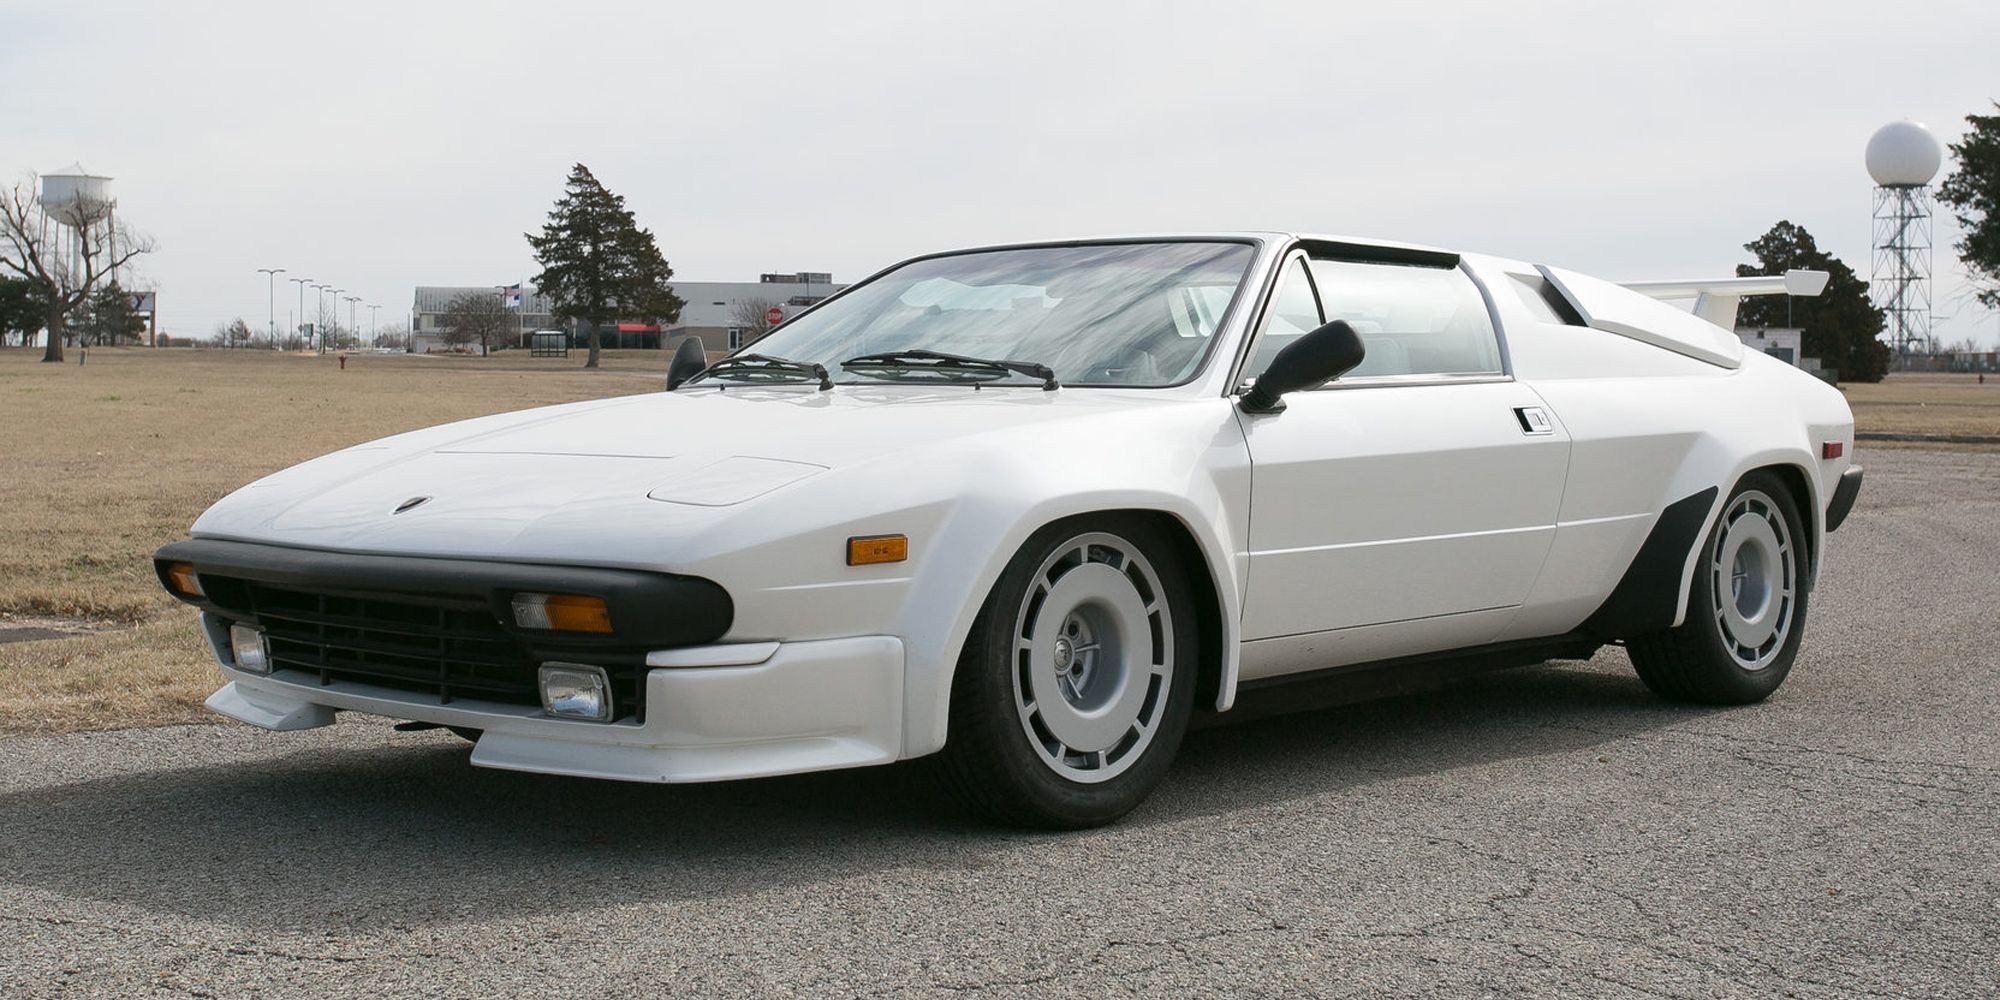 Front 3/4 view of a white Jalpa